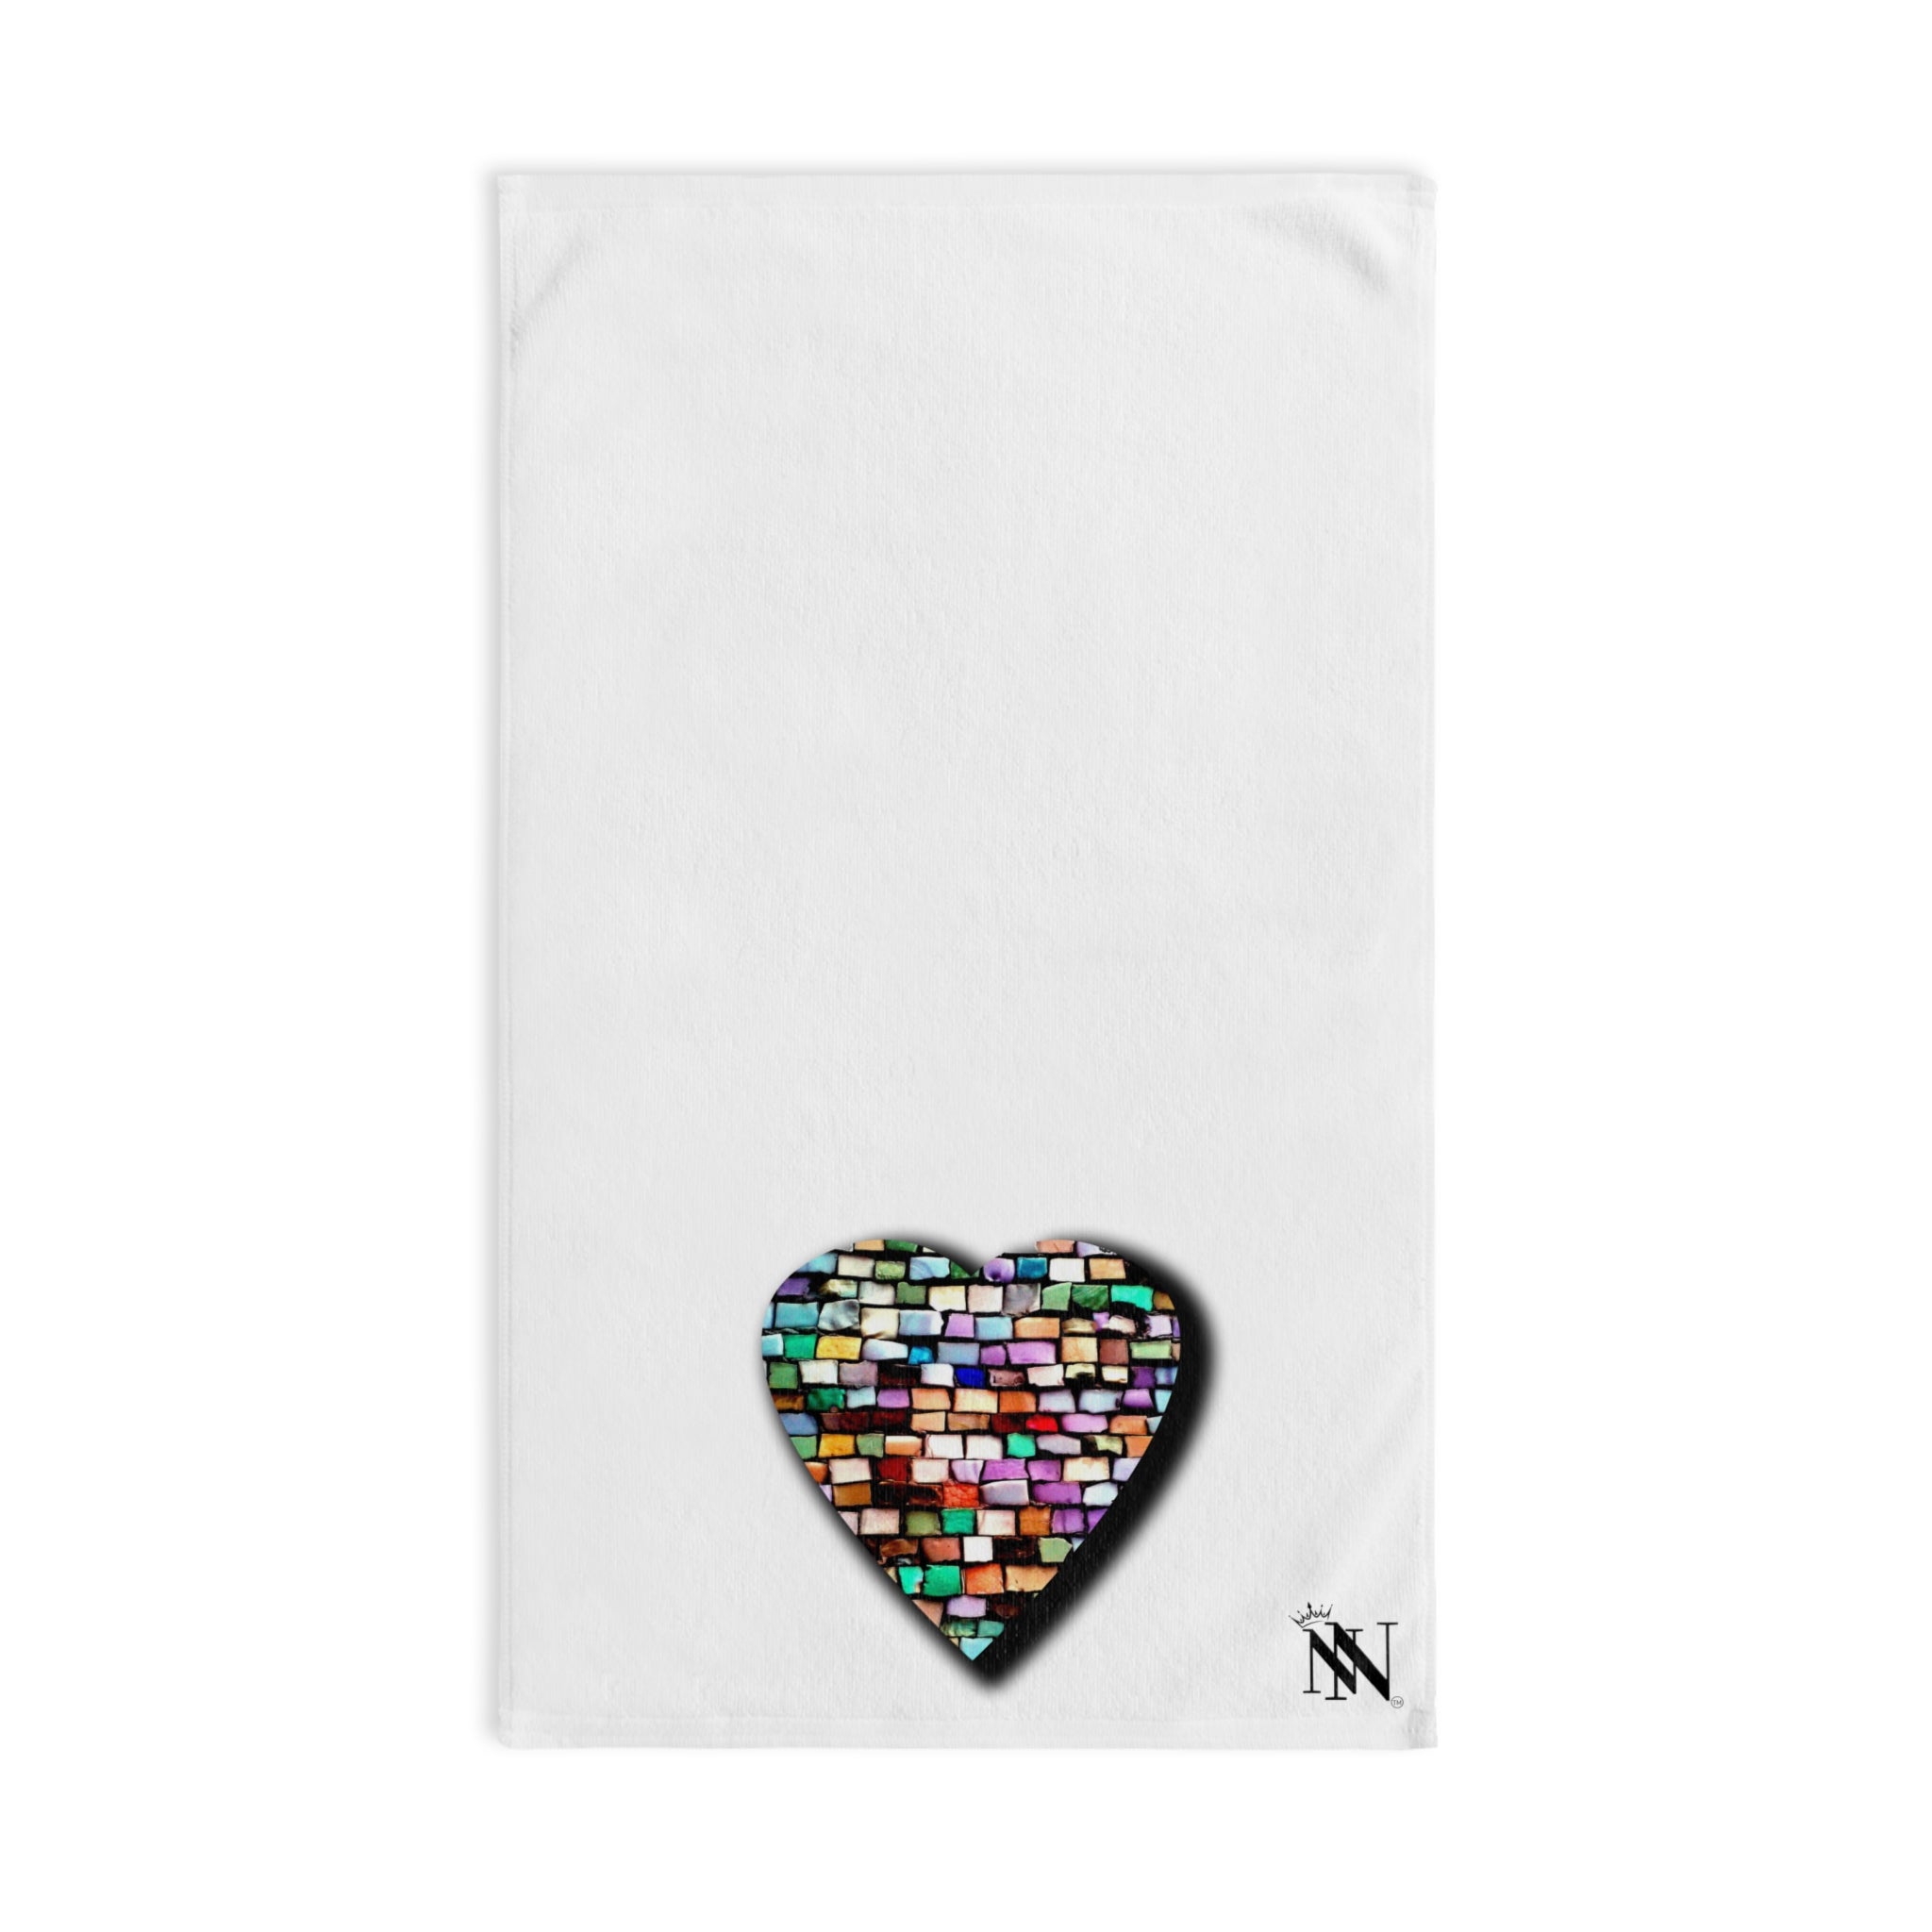 Mosaic Heart Tile 3D White | Funny Gifts for Men - Gifts for Him - Birthday Gifts for Men, Him, Her, Husband, Boyfriend, Girlfriend, New Couple Gifts, Fathers & Valentines Day Gifts, Christmas Gifts NECTAR NAPKINS